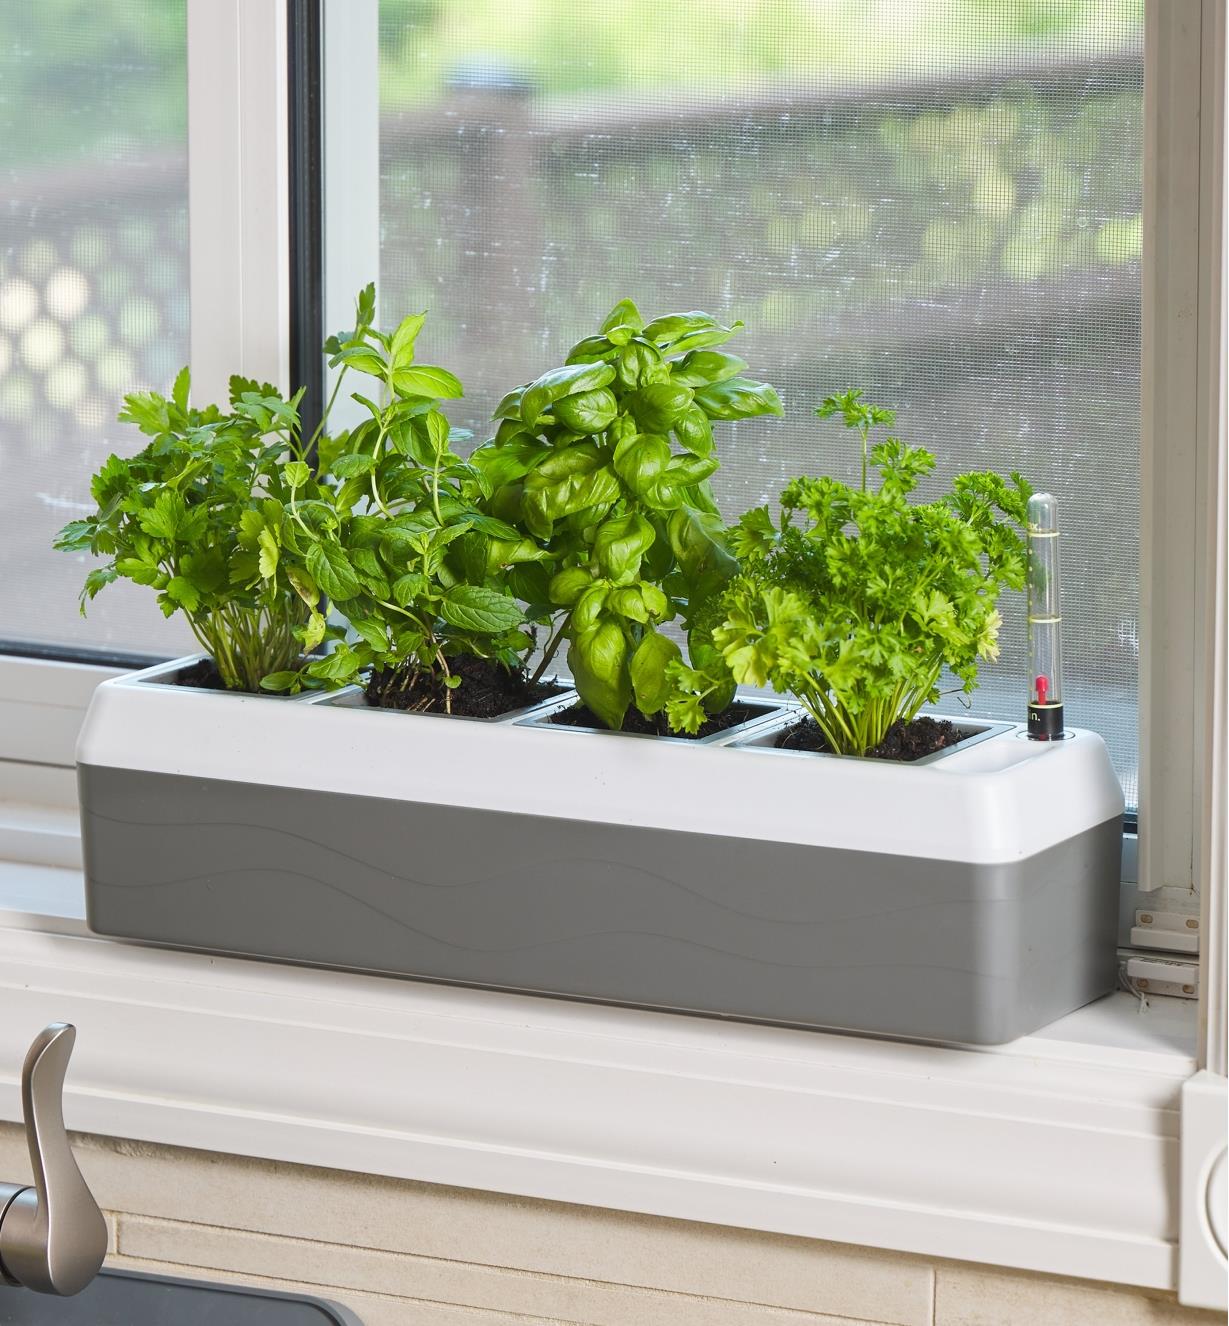 A self-watering windowsill planter filled with herbs sits on a window ledge